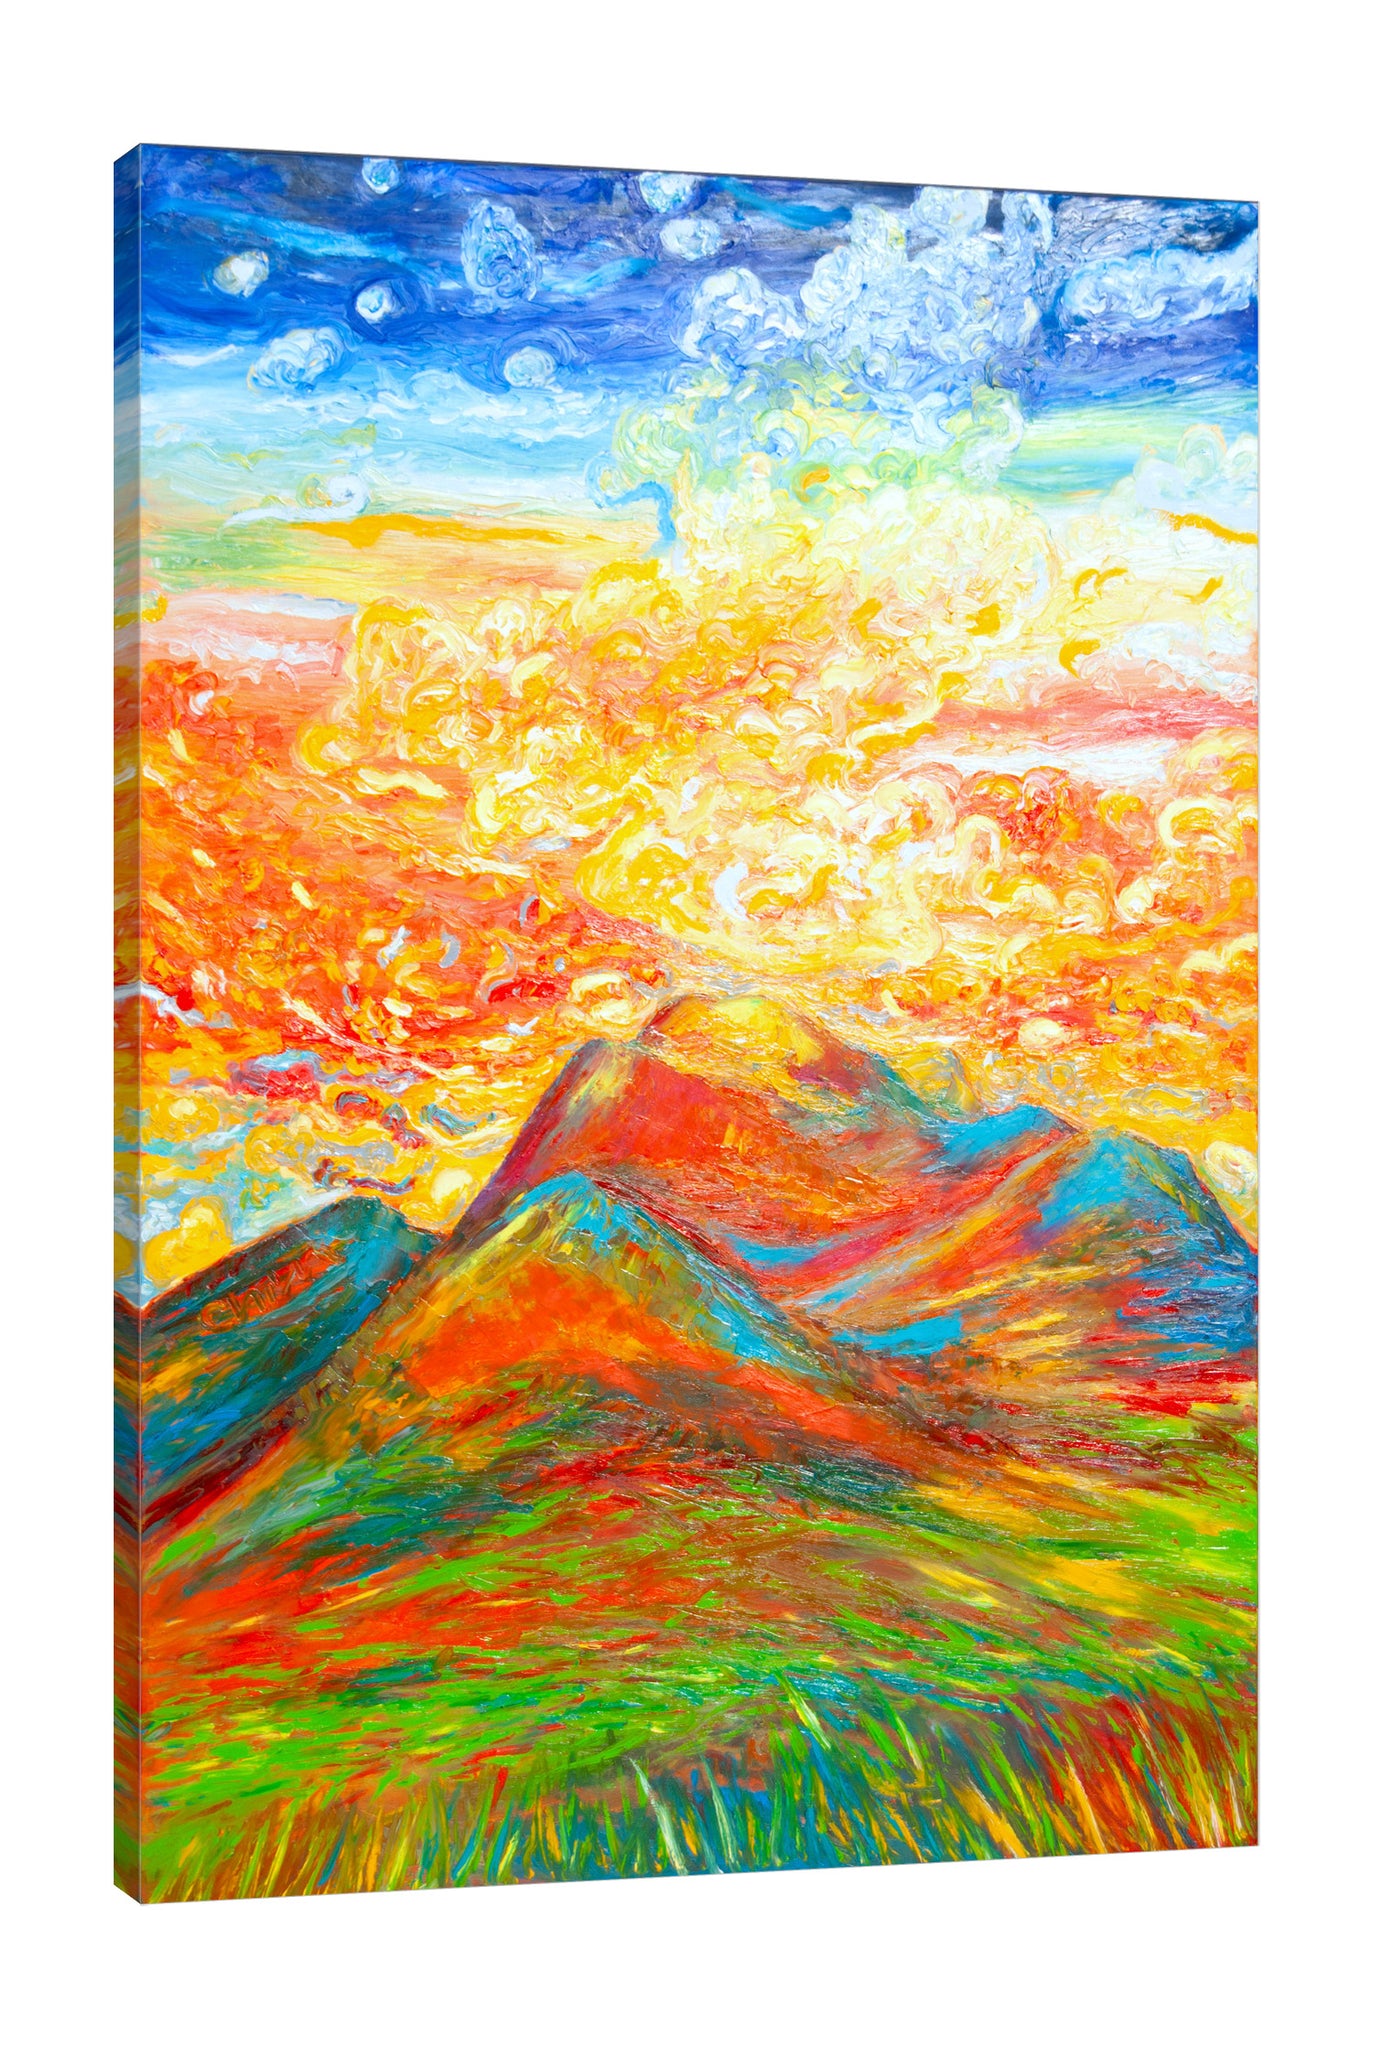 Chiara-Magni,Modern & Contemporary,Landscape & Nature,Finger-paint,clouds,scenery,mountains,skies,blue,yellow,orange,red,green,grass,portrait,